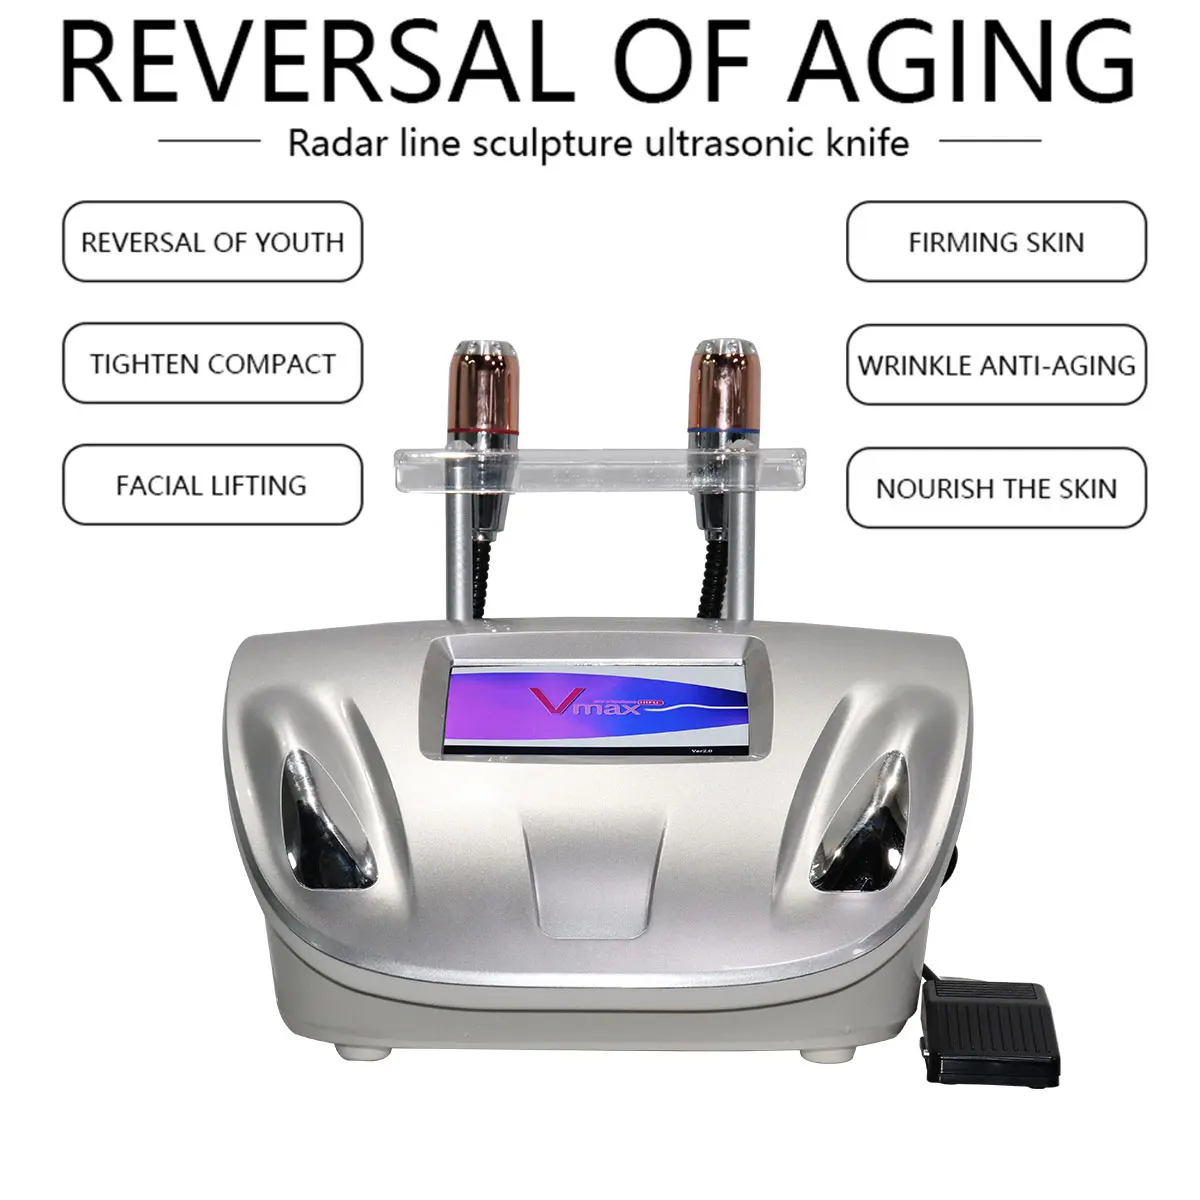 

Vmax Facial Lifting Wrinkle Removal Machine Body Shaping Skin Tightening Anti Aging Beauty Equipment 3.0mm 4.5mm 2 Cartridges